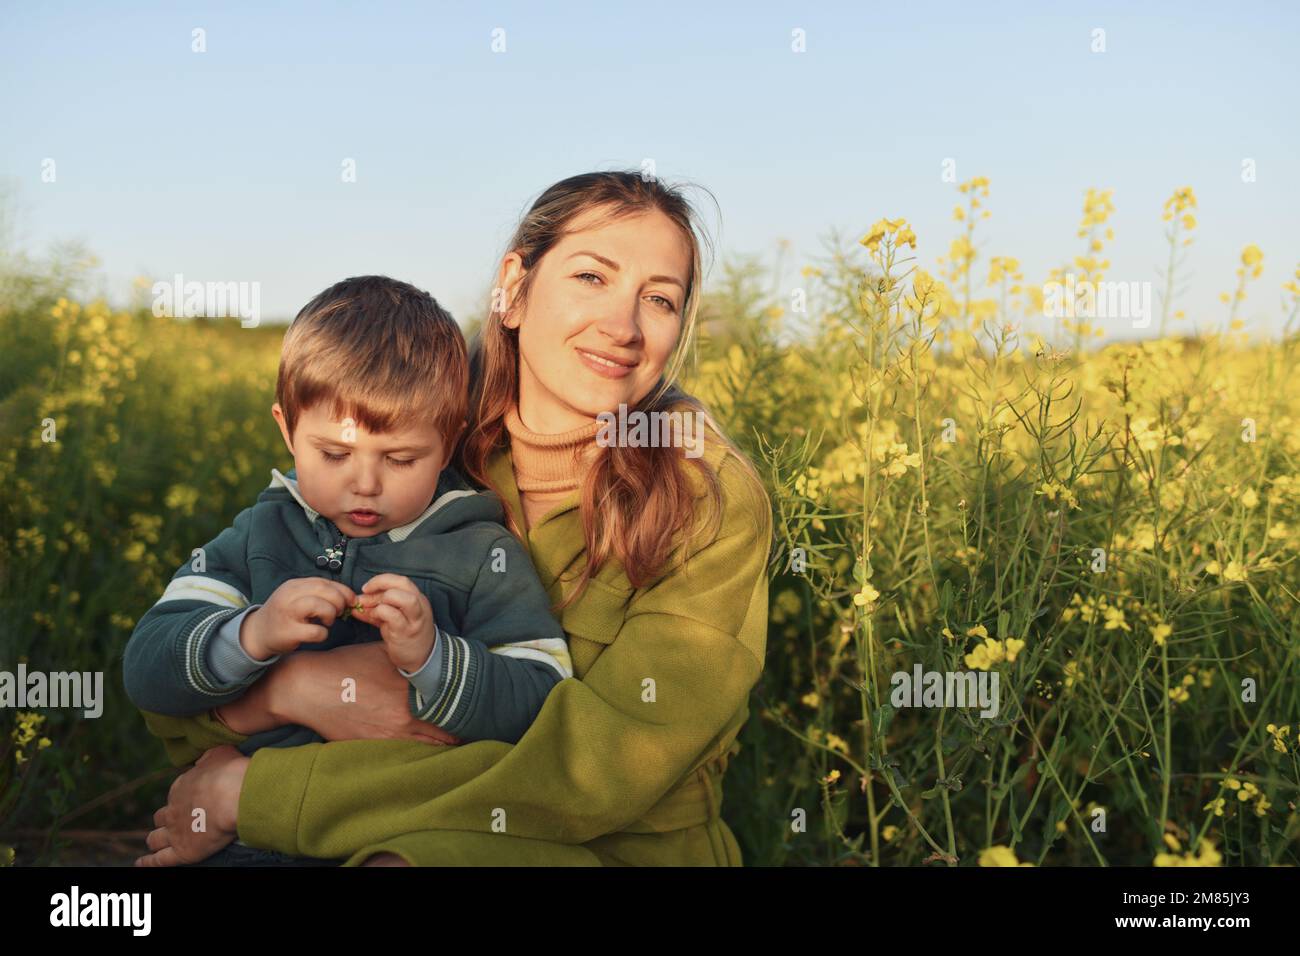 Mother and son in a rapeseed field Stock Photo